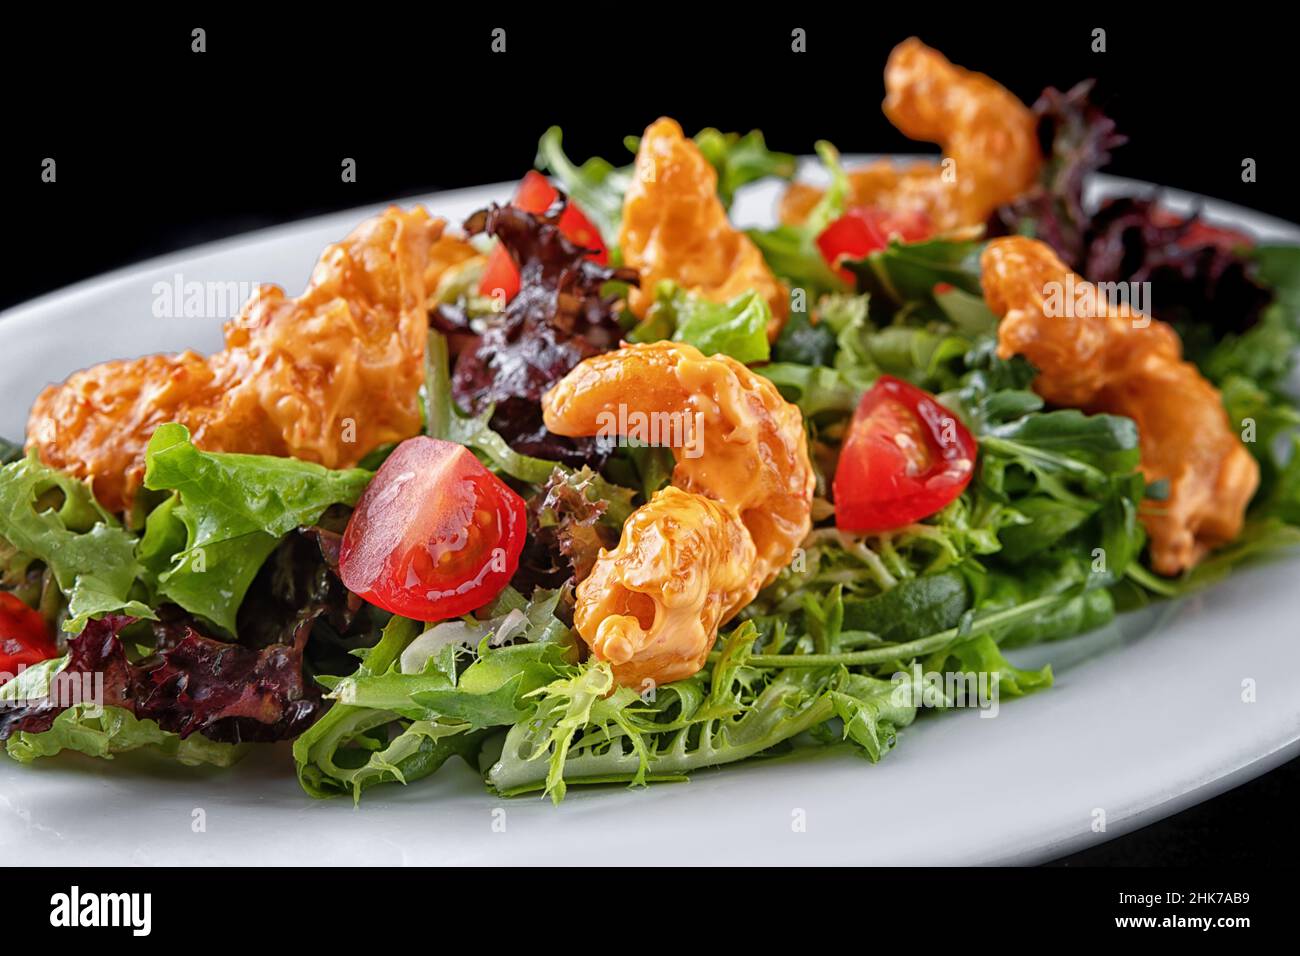 Salad with shrimp in batter, herbs and tomatoes on a plate Stock Photo